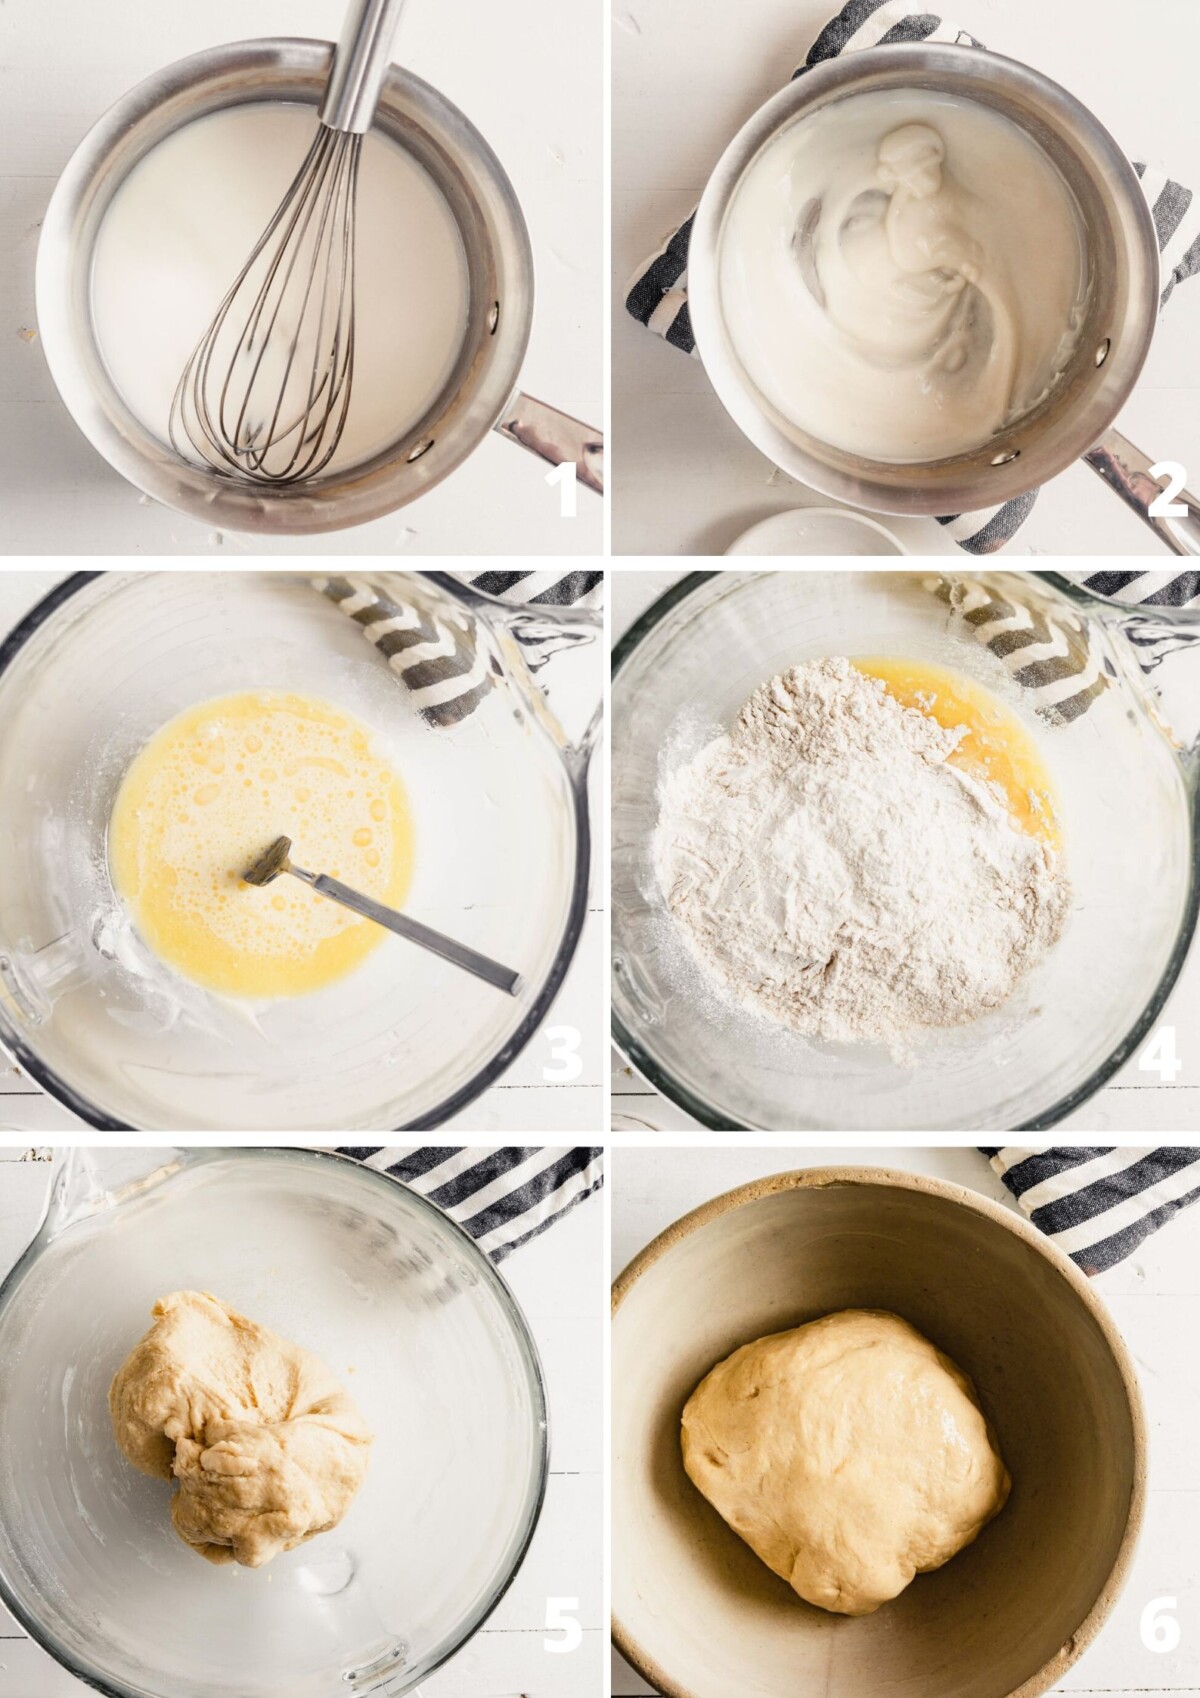 Gallery of images showing the steps to making milk bread rolls